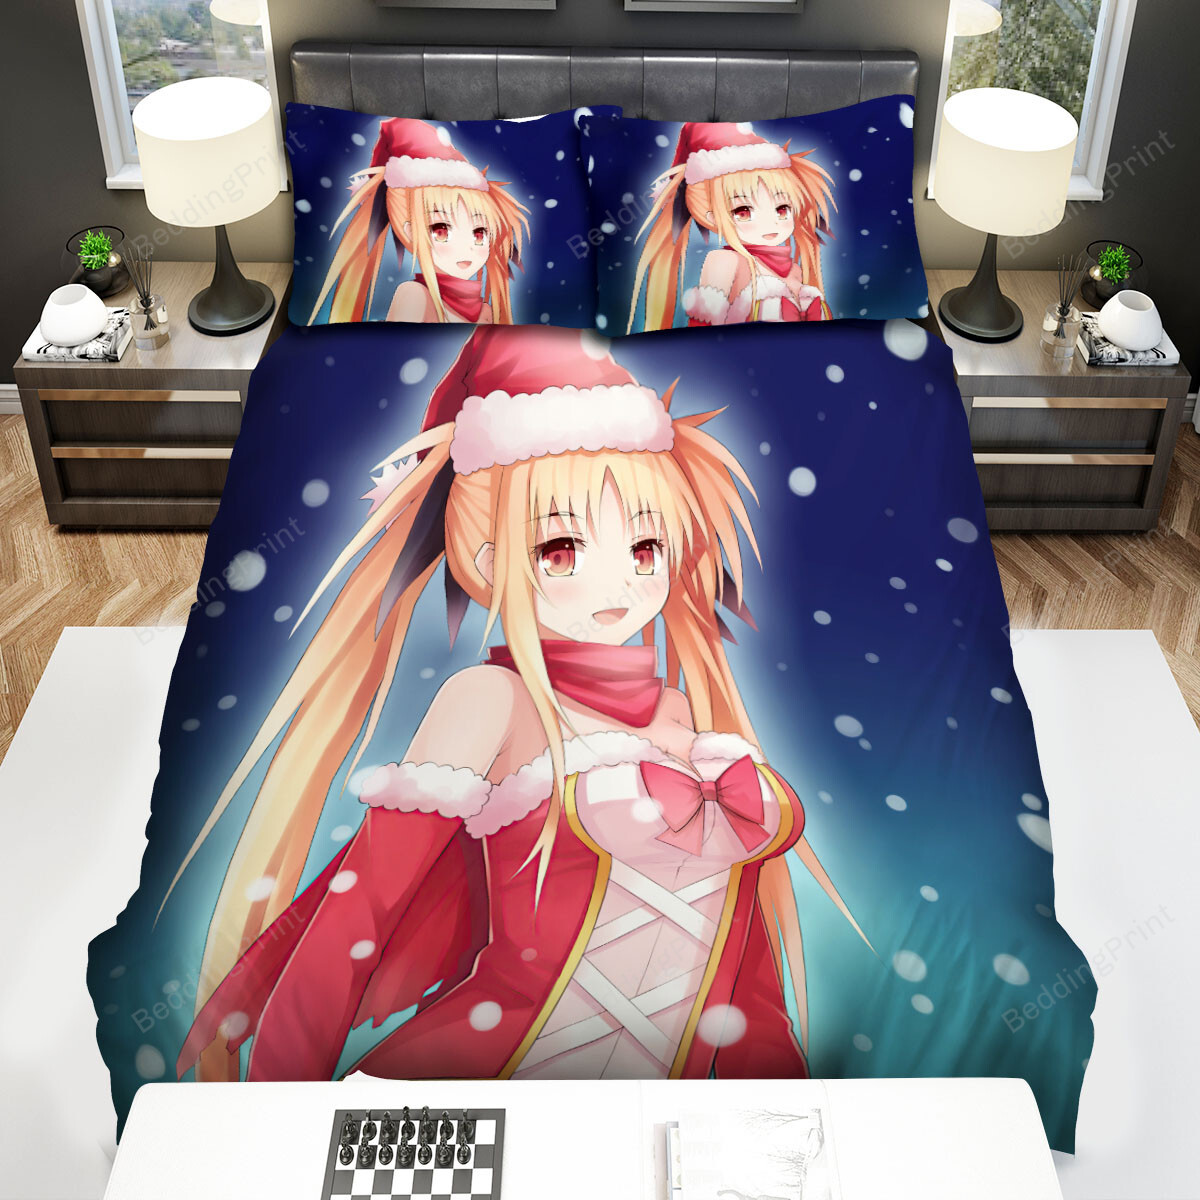 Magical Girl Lyrical Nanoha Merry Christmas From Fate Testarossa Bed Sheets Spread Duvet Cover Bedding Sets